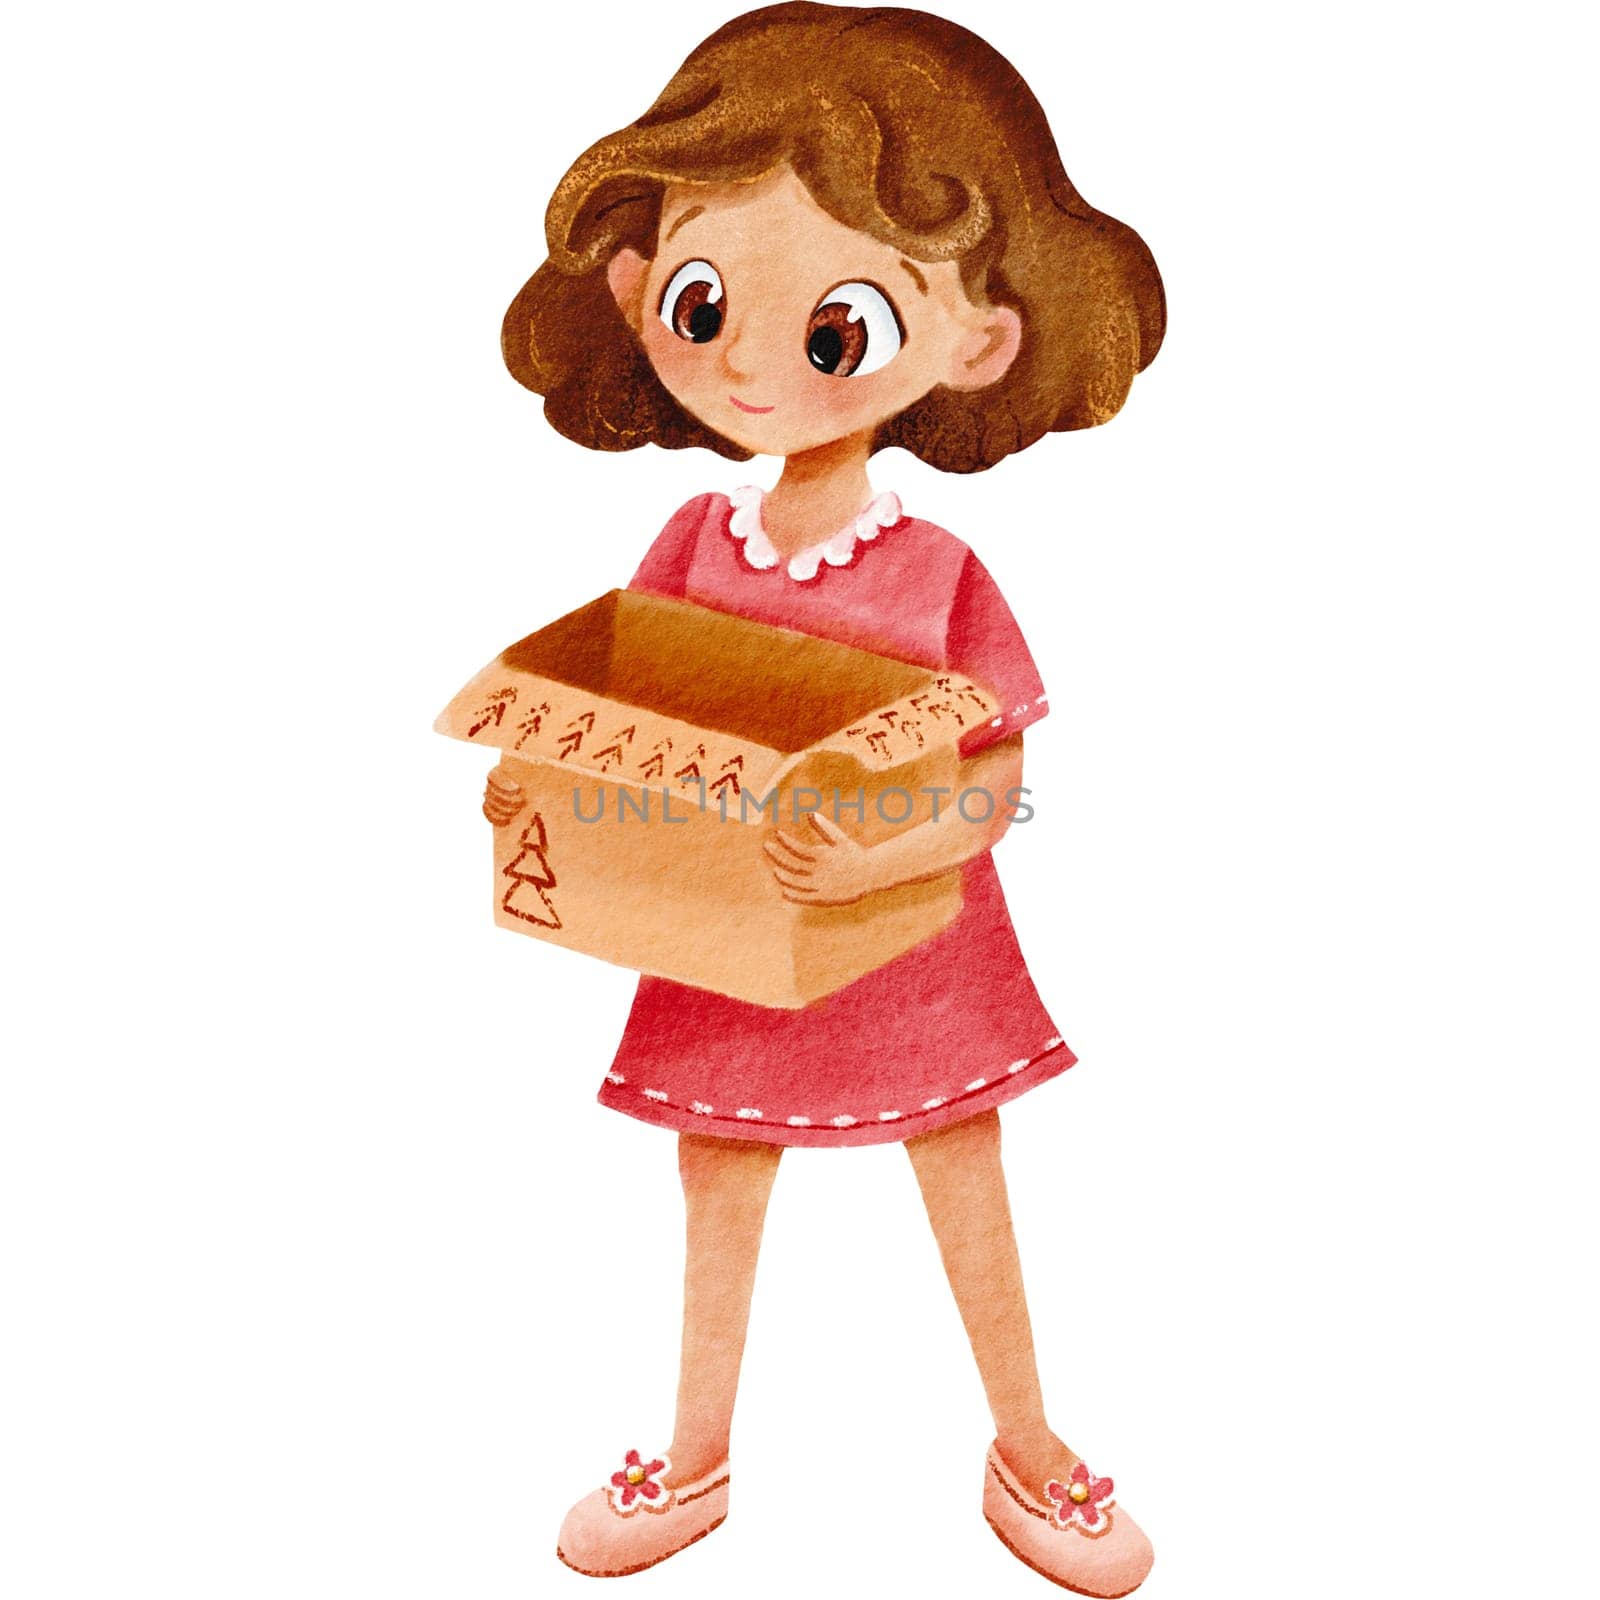 A girl in a pink dress is holding an empty box. Cute baby is smiling. Watercolor isolated illustration. Design for card making, party invitations, logos, greeting cards, posters, D.I.Y. and other..